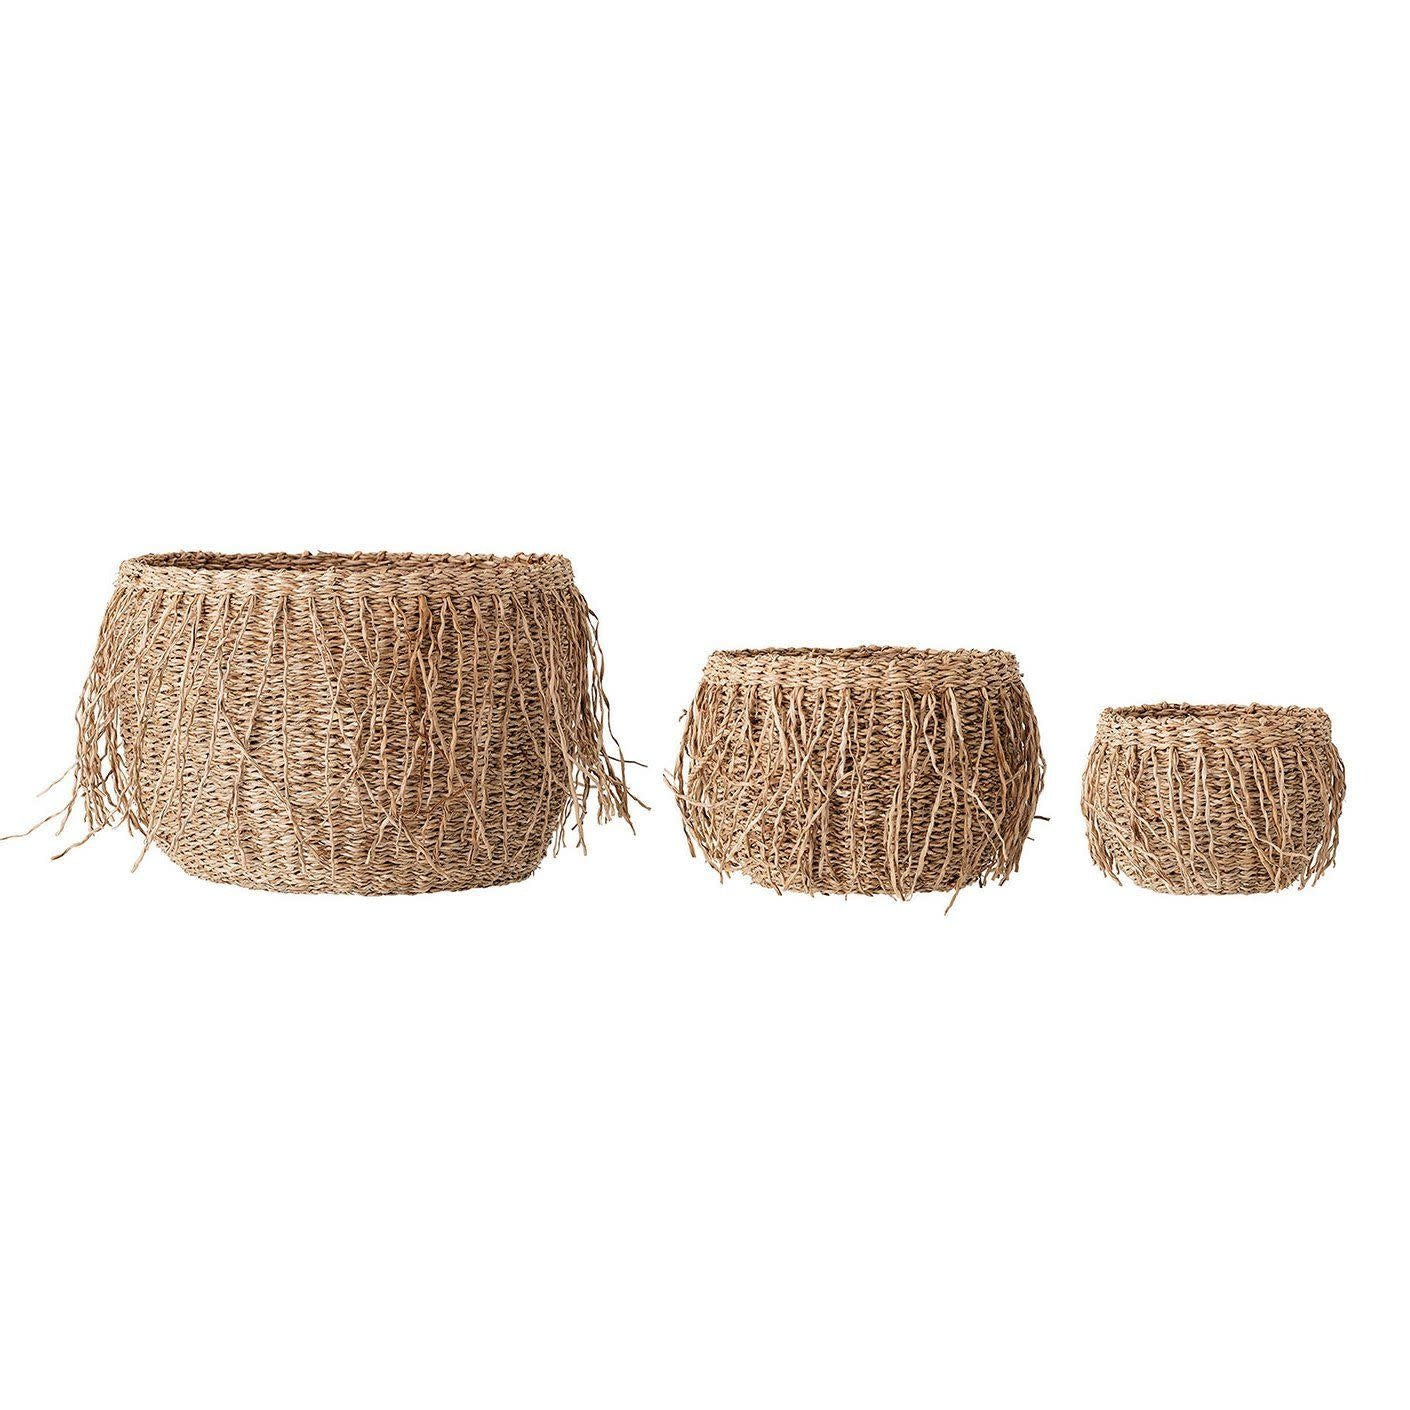 Woven Sea Grass Basket with Fringe (Multiple Sizes)